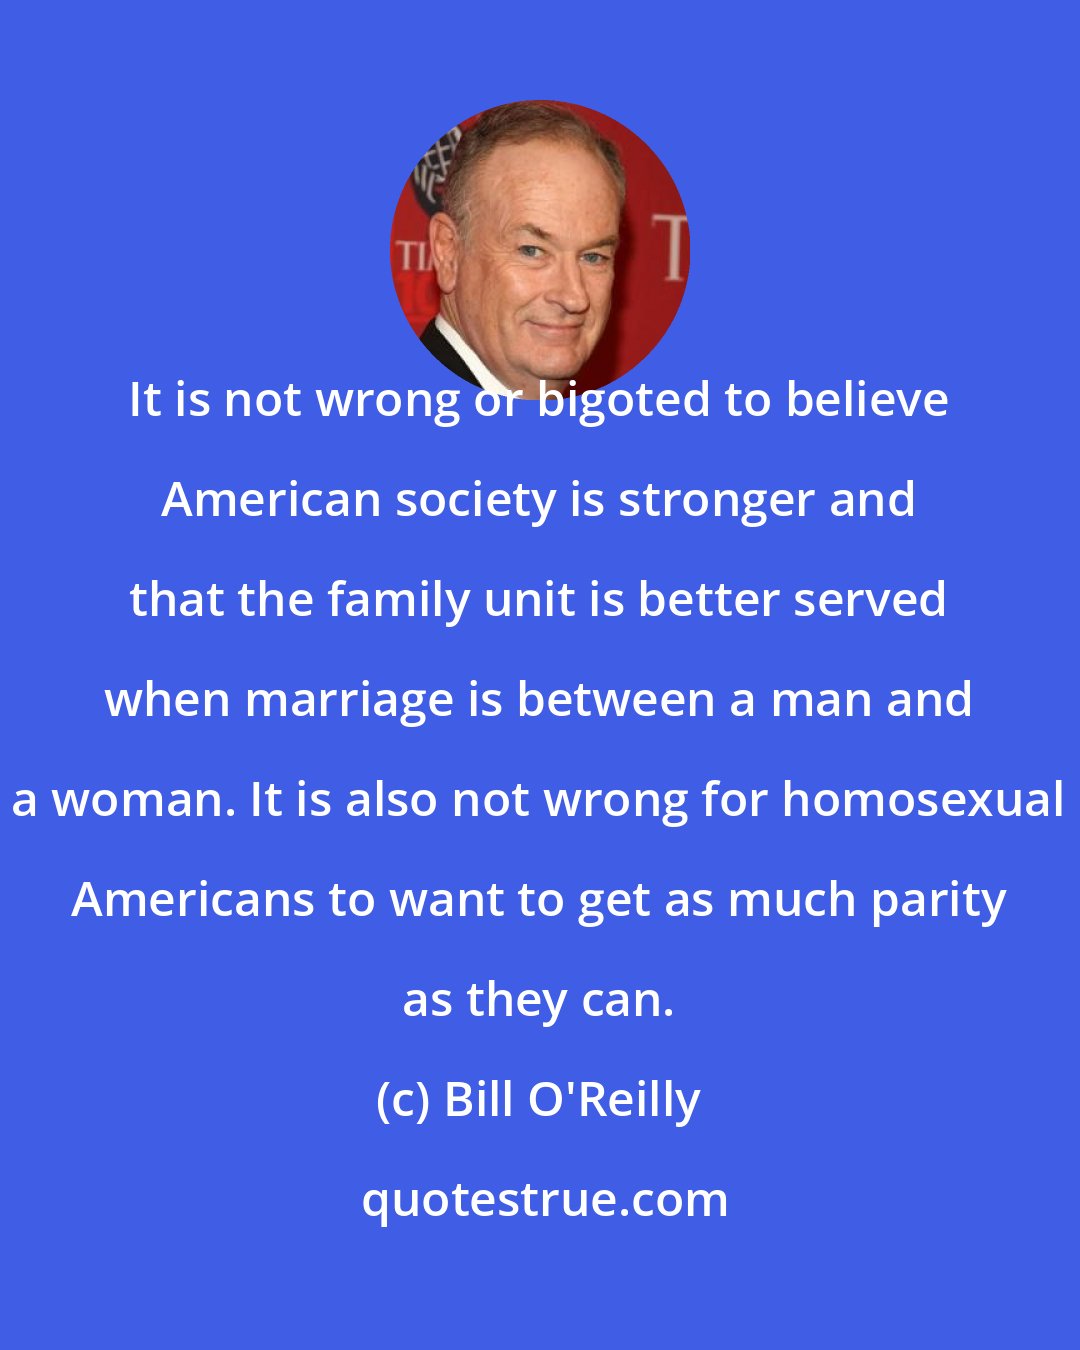 Bill O'Reilly: It is not wrong or bigoted to believe American society is stronger and that the family unit is better served when marriage is between a man and a woman. It is also not wrong for homosexual Americans to want to get as much parity as they can.